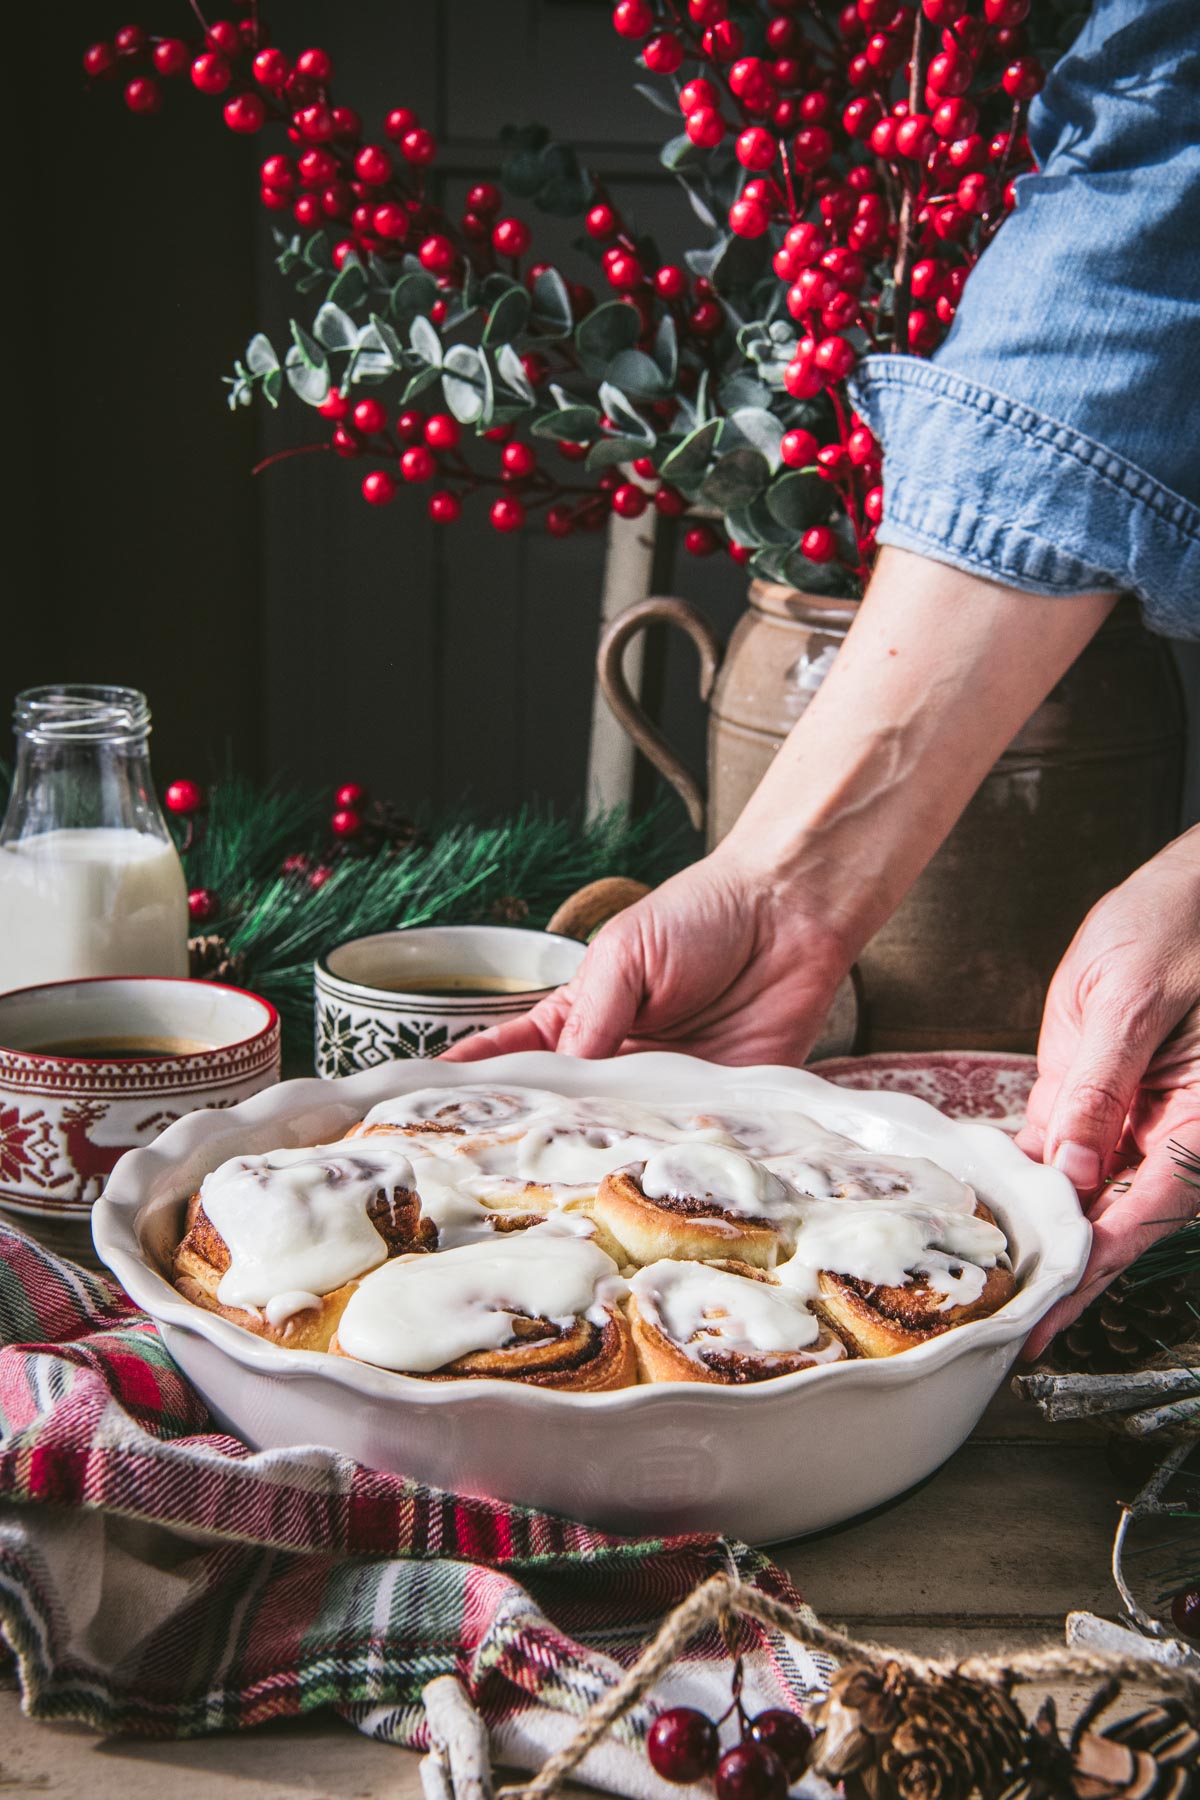 Hands serving a pan of cinnamon rolls on a Christmas table